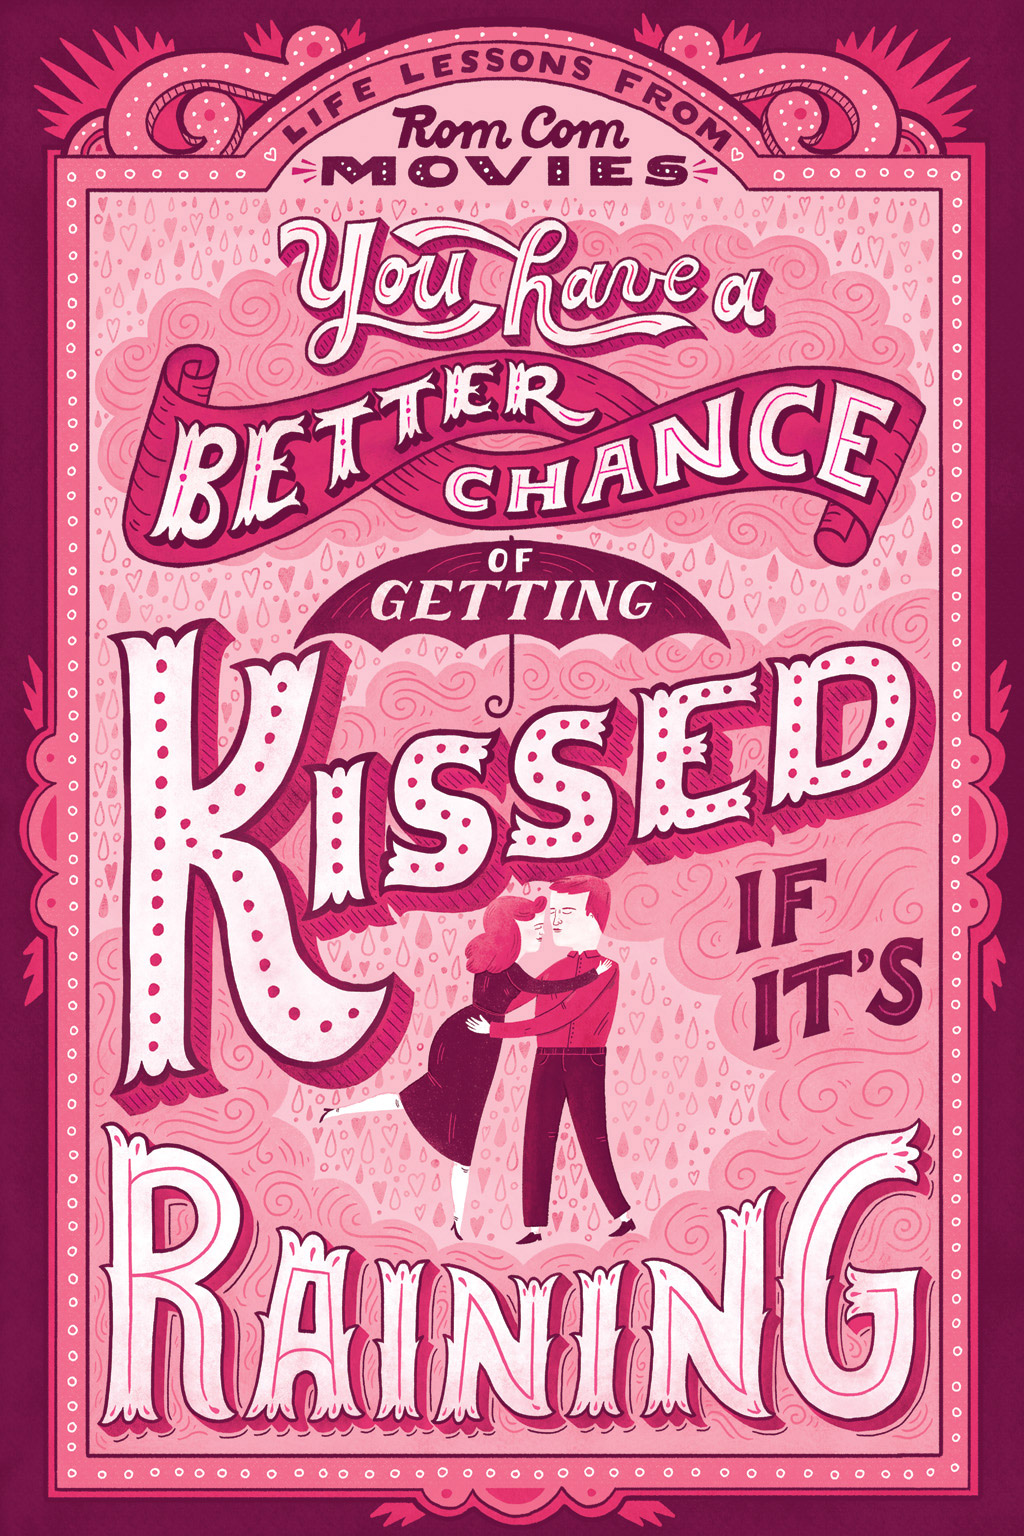 Life Lessions from Rom Com Movies: You have a better chance of getting kissed if it's raining